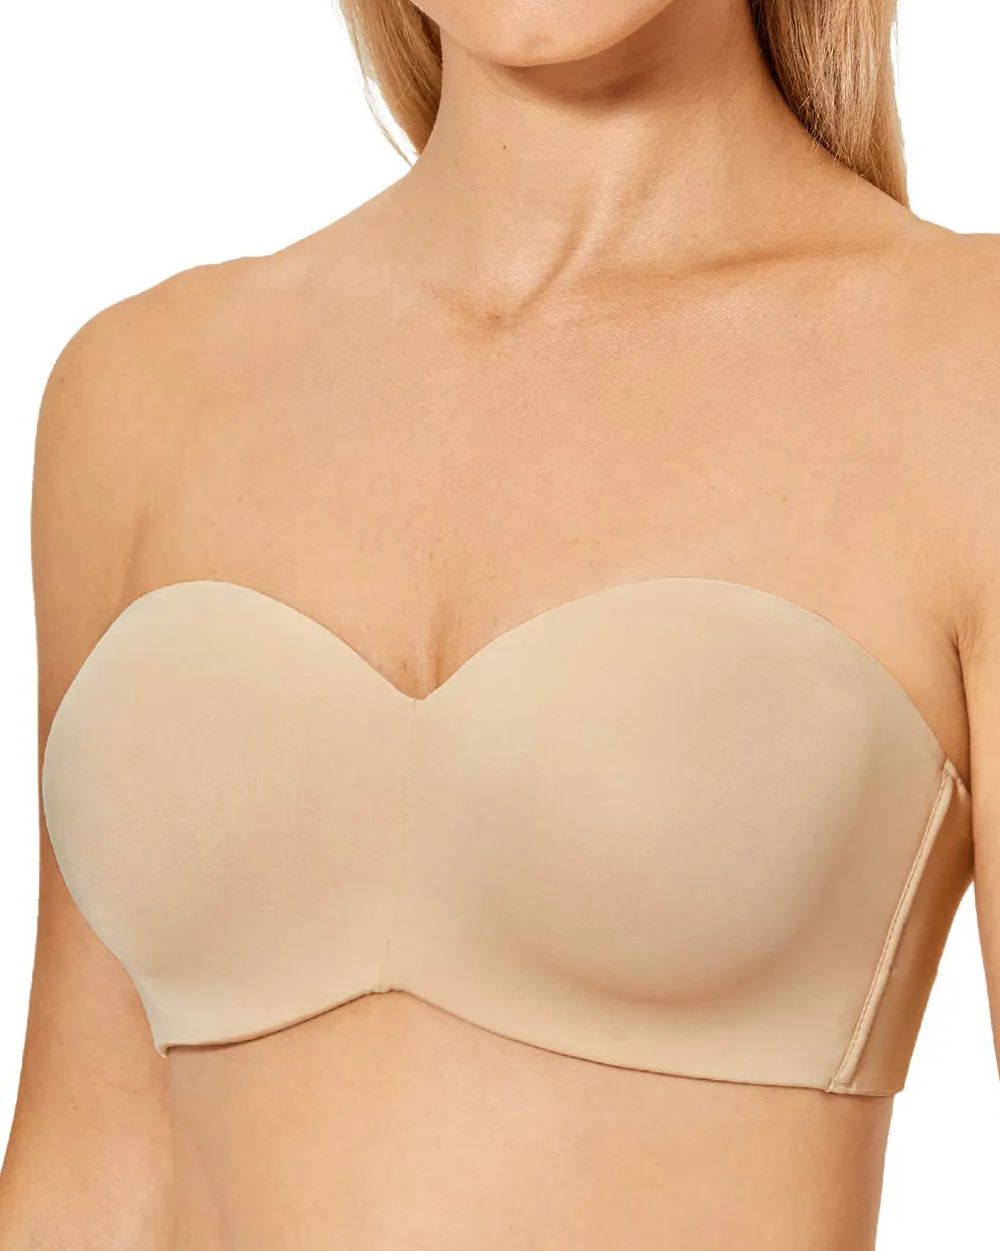 Volwco Plus Size Invisible Bra For C/D/E/F Cup, Strapless Push Up